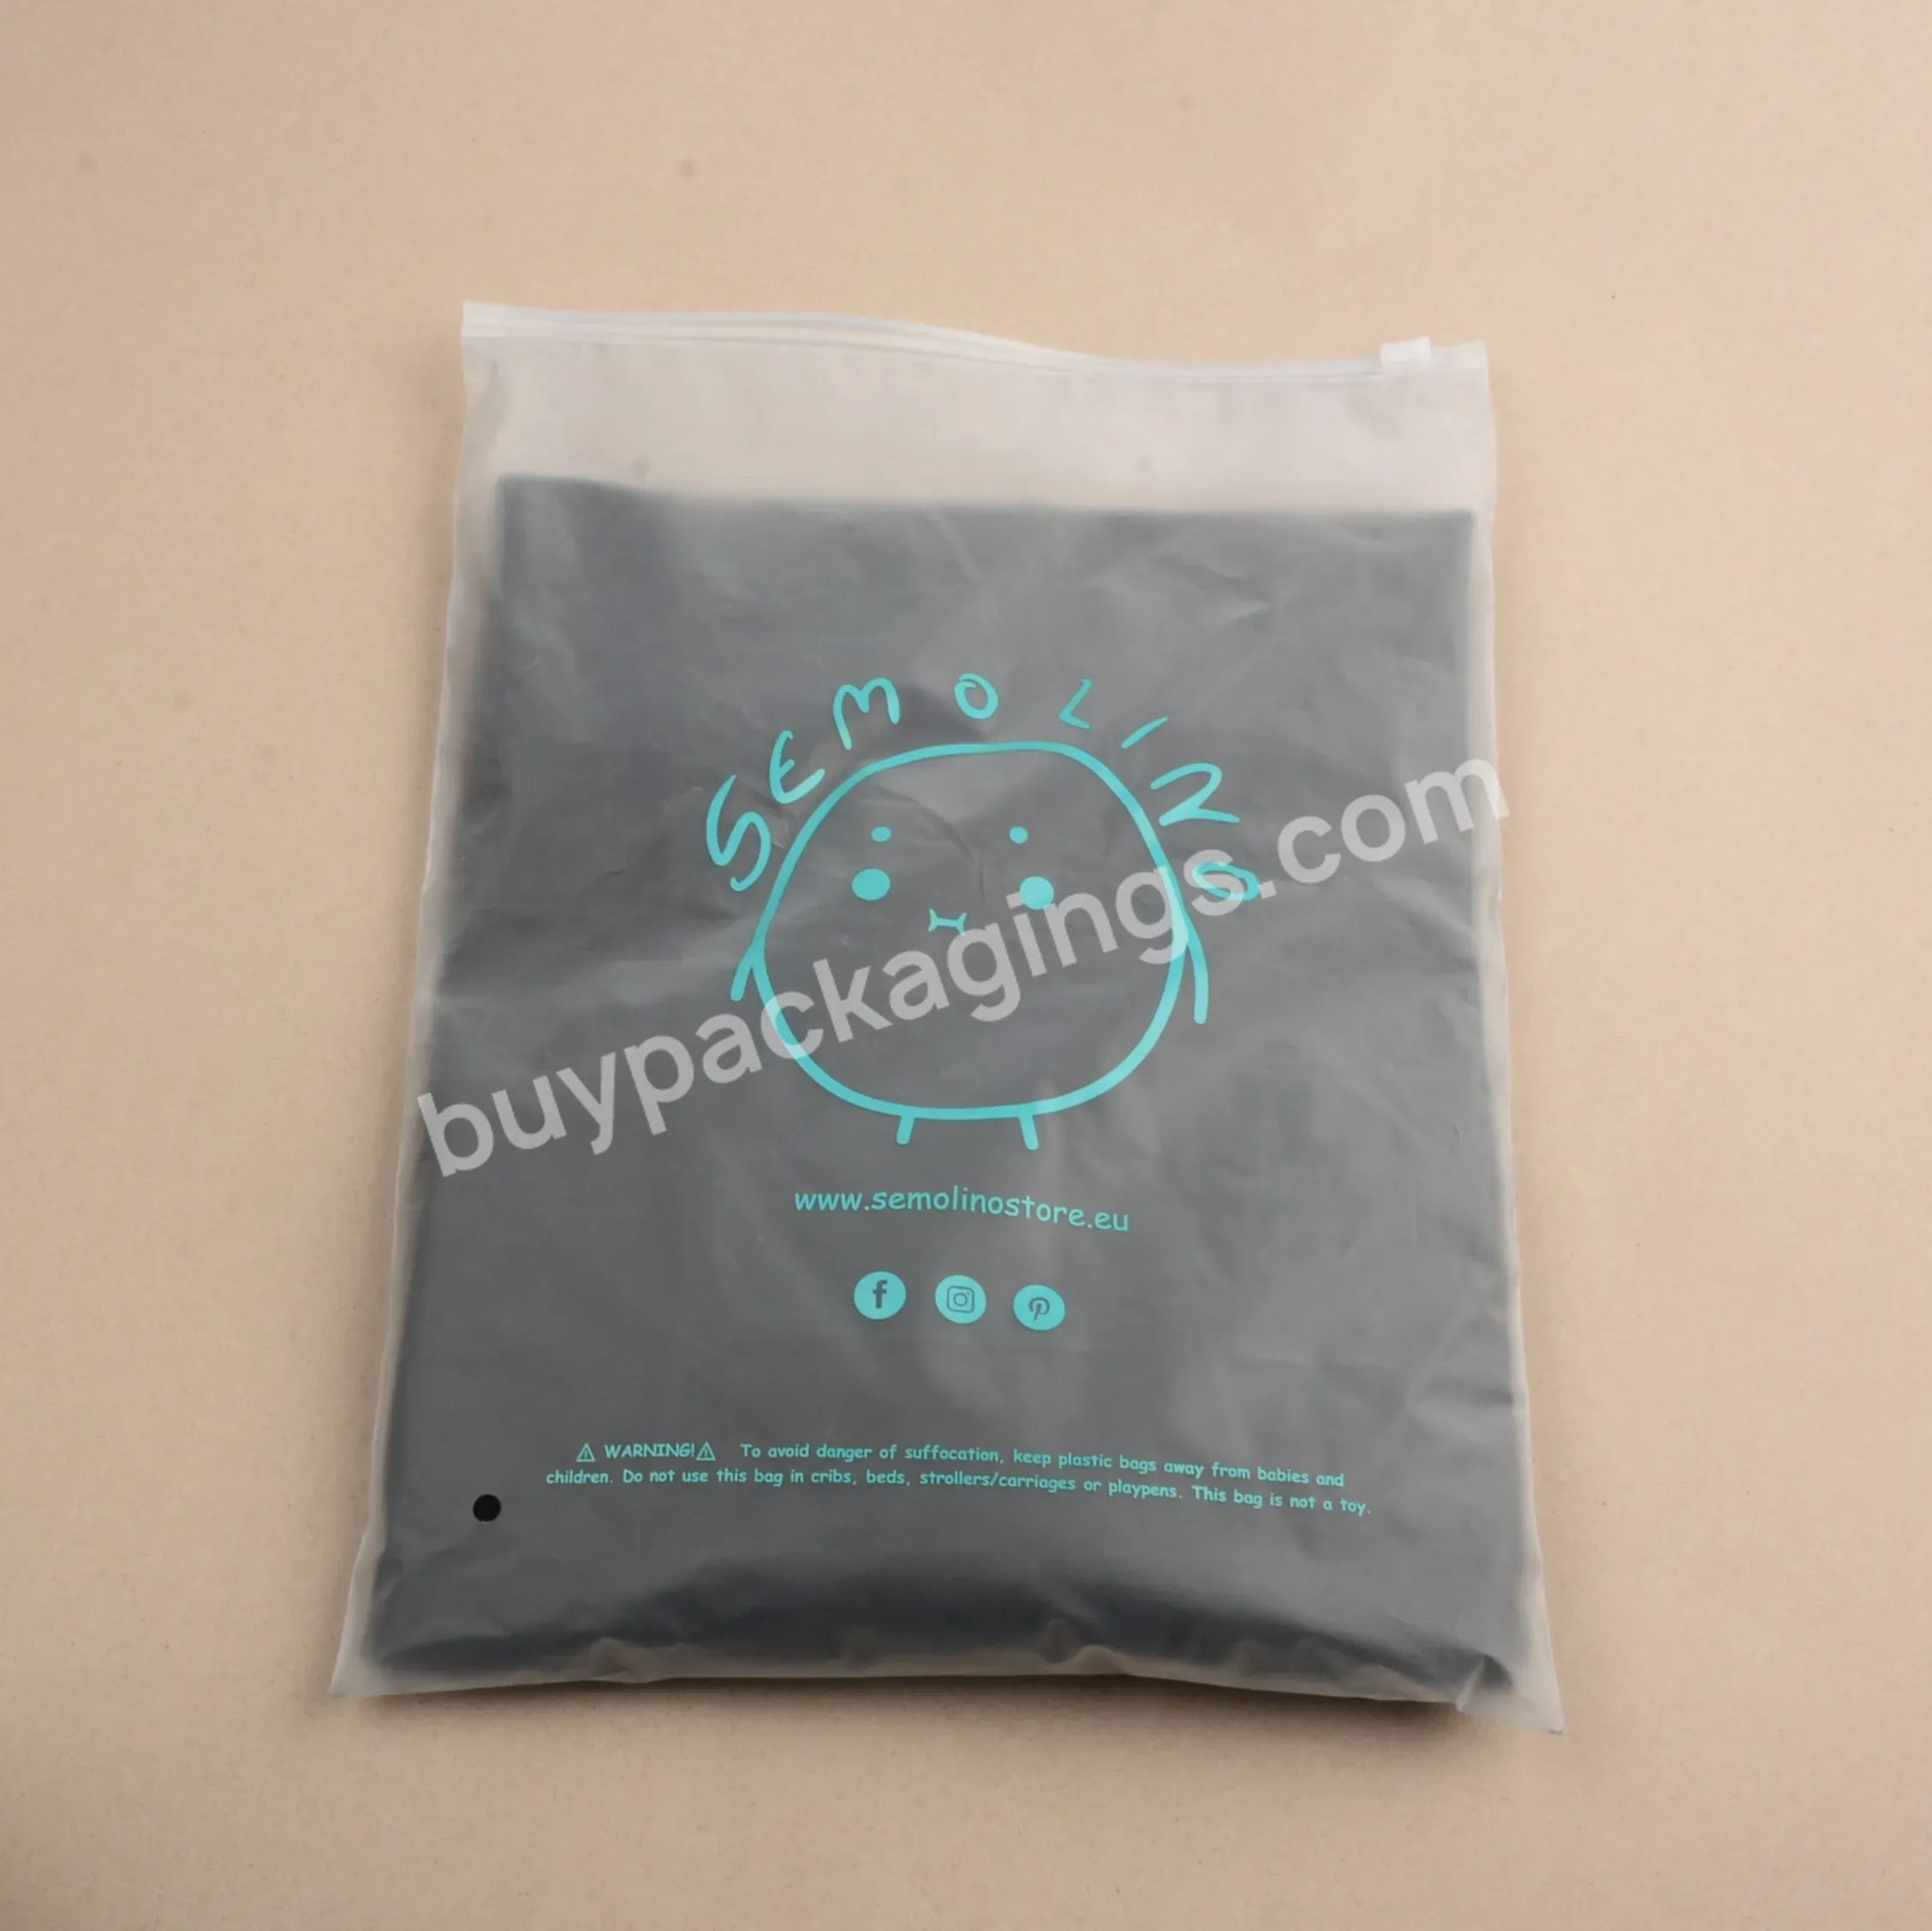 Customized Hot Sale Clothes Packing Zipper Bags Shipping Packaging Bags With Your Logo - Buy Clothes Packing Zipper Bags,Shipping Packaging Bags,Zipper Bags.